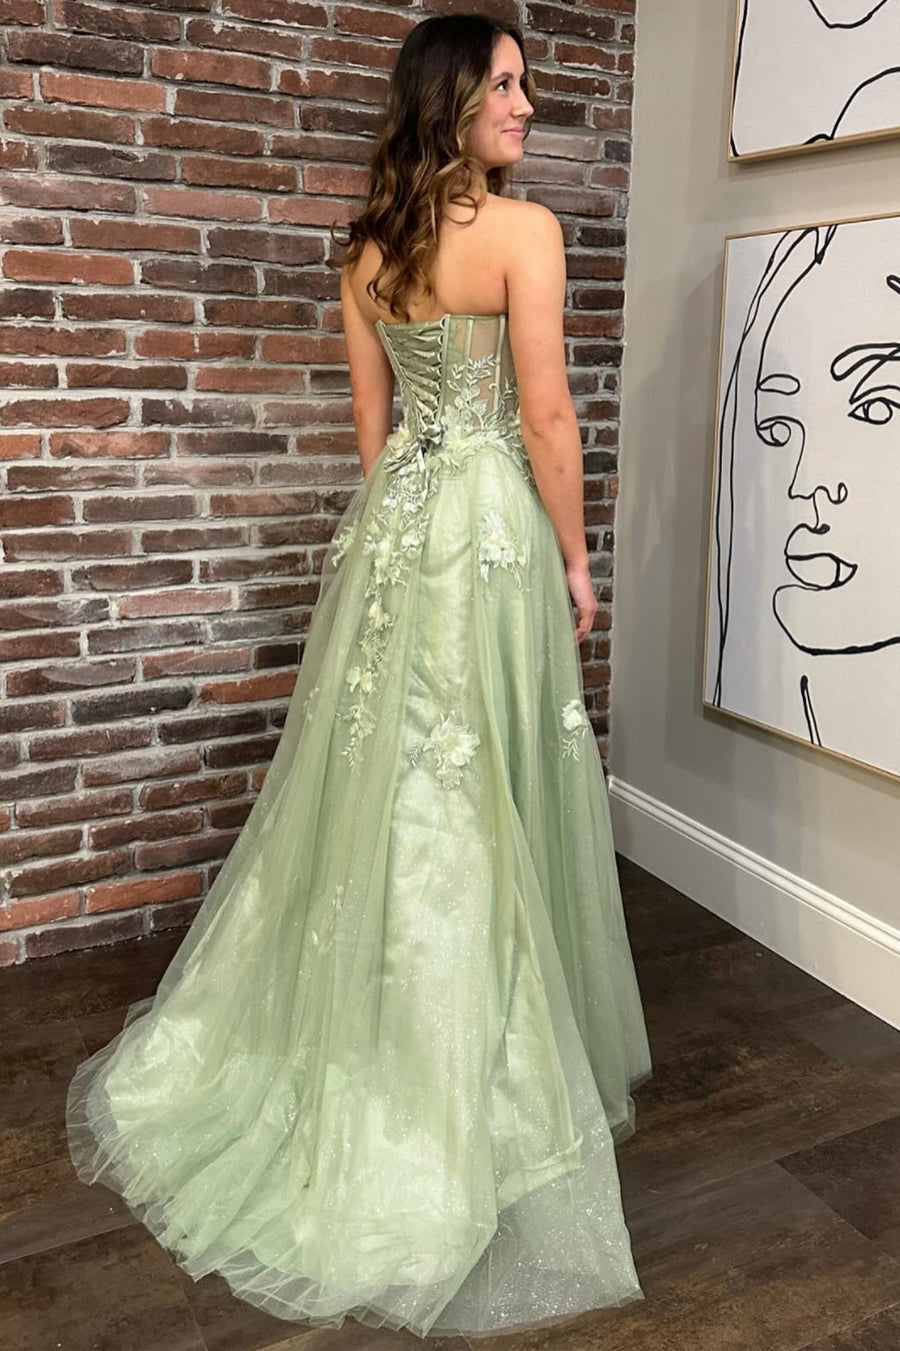 Sweetheart Newest Long Prom Dresses, Appliques Wedding Party Dresses, Girl Graduation Prom Dresses